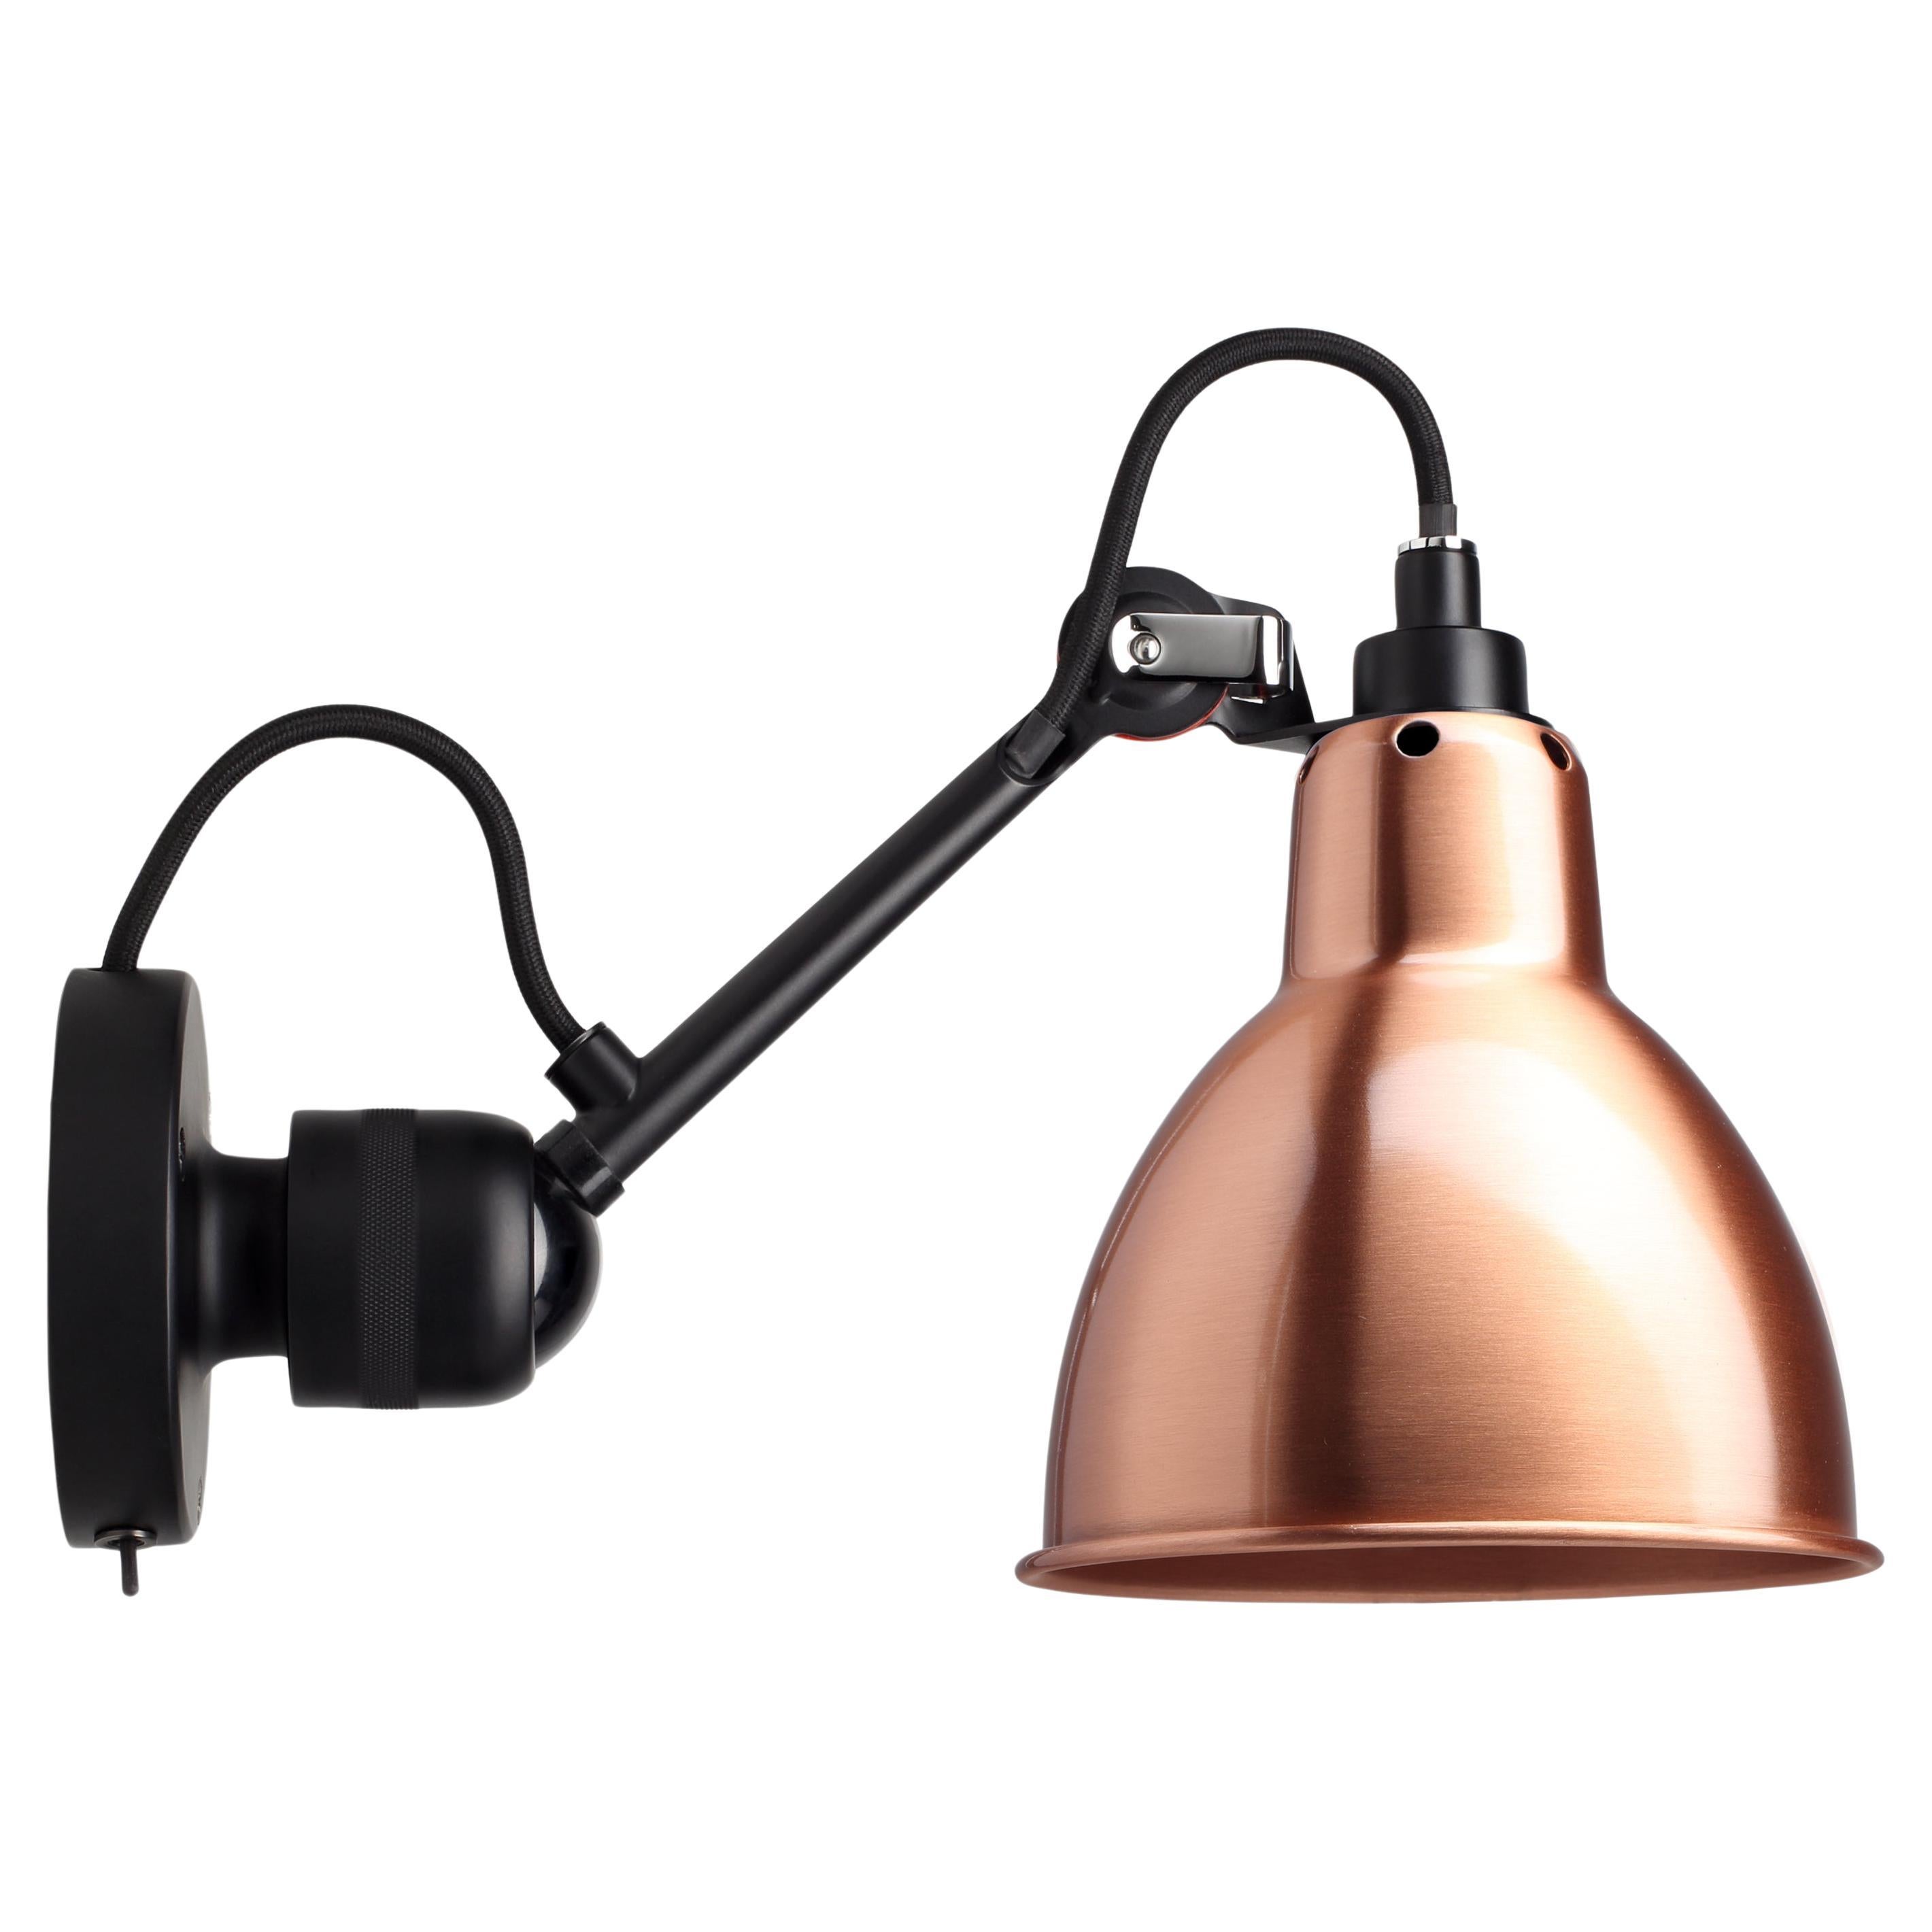 DCW Editions La Lampe Gras N°304 SW Wall Lamp in Black Arm and Copper Shade For Sale